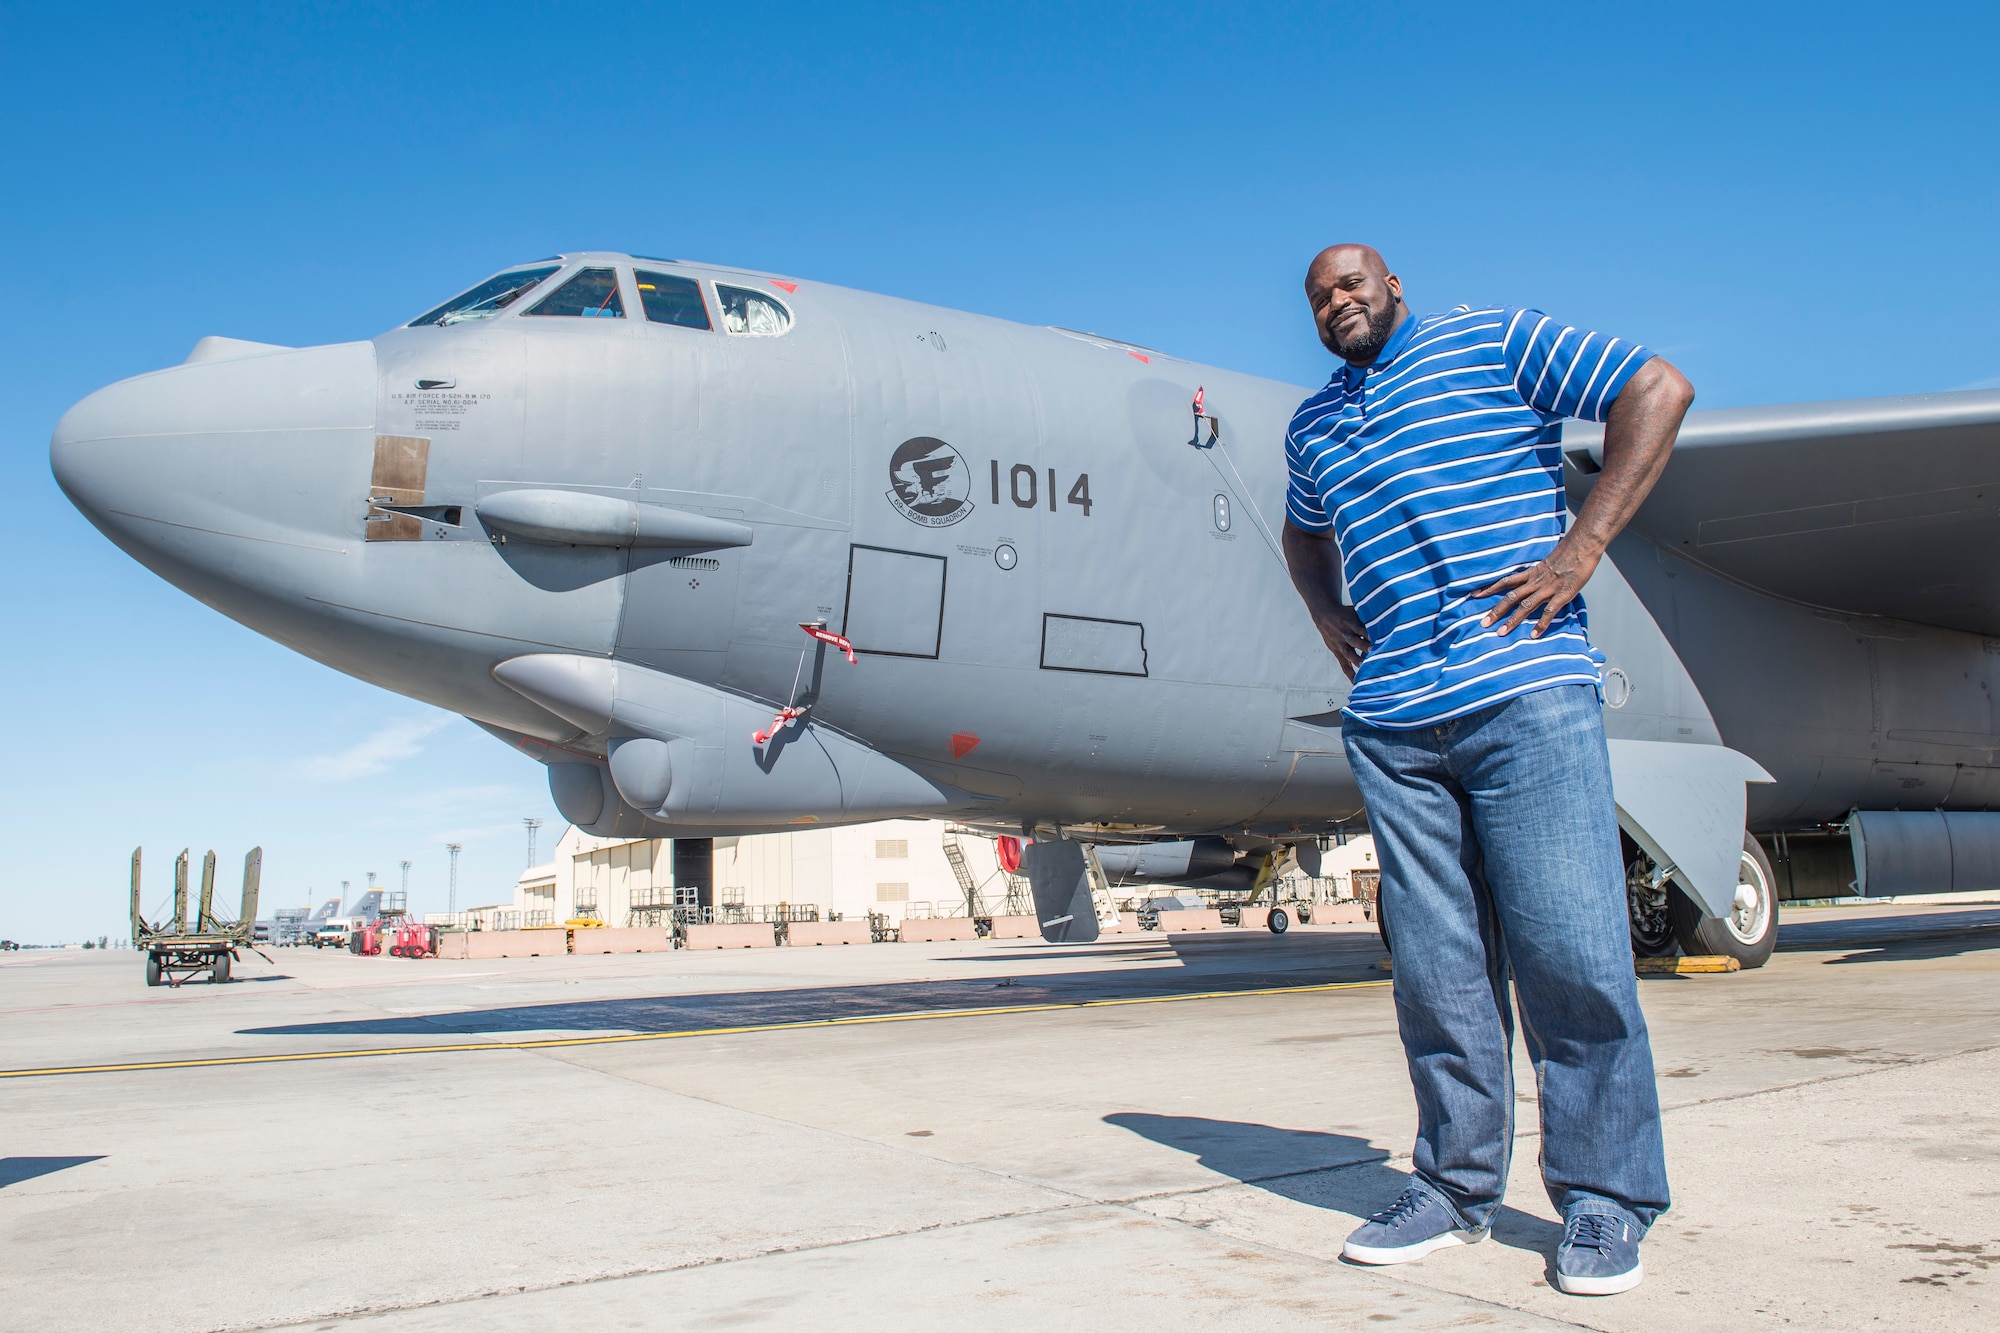 Discover the $2m ‘Dunkman’ private plane owned by NBA legend Shaquille ...